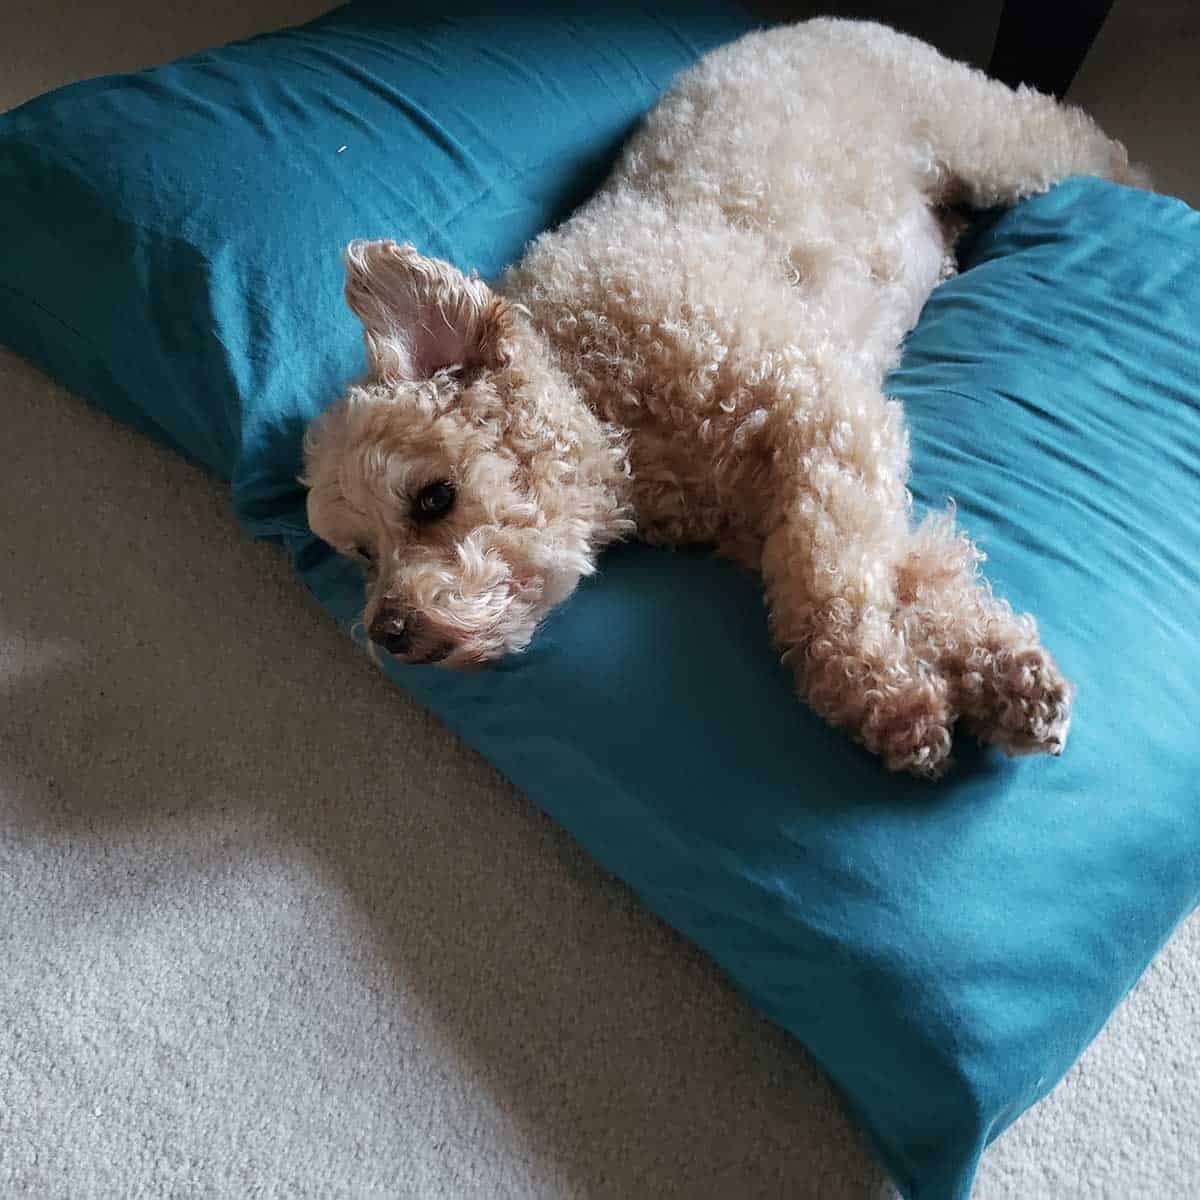 Mickey the miniature poodle laying on pillows